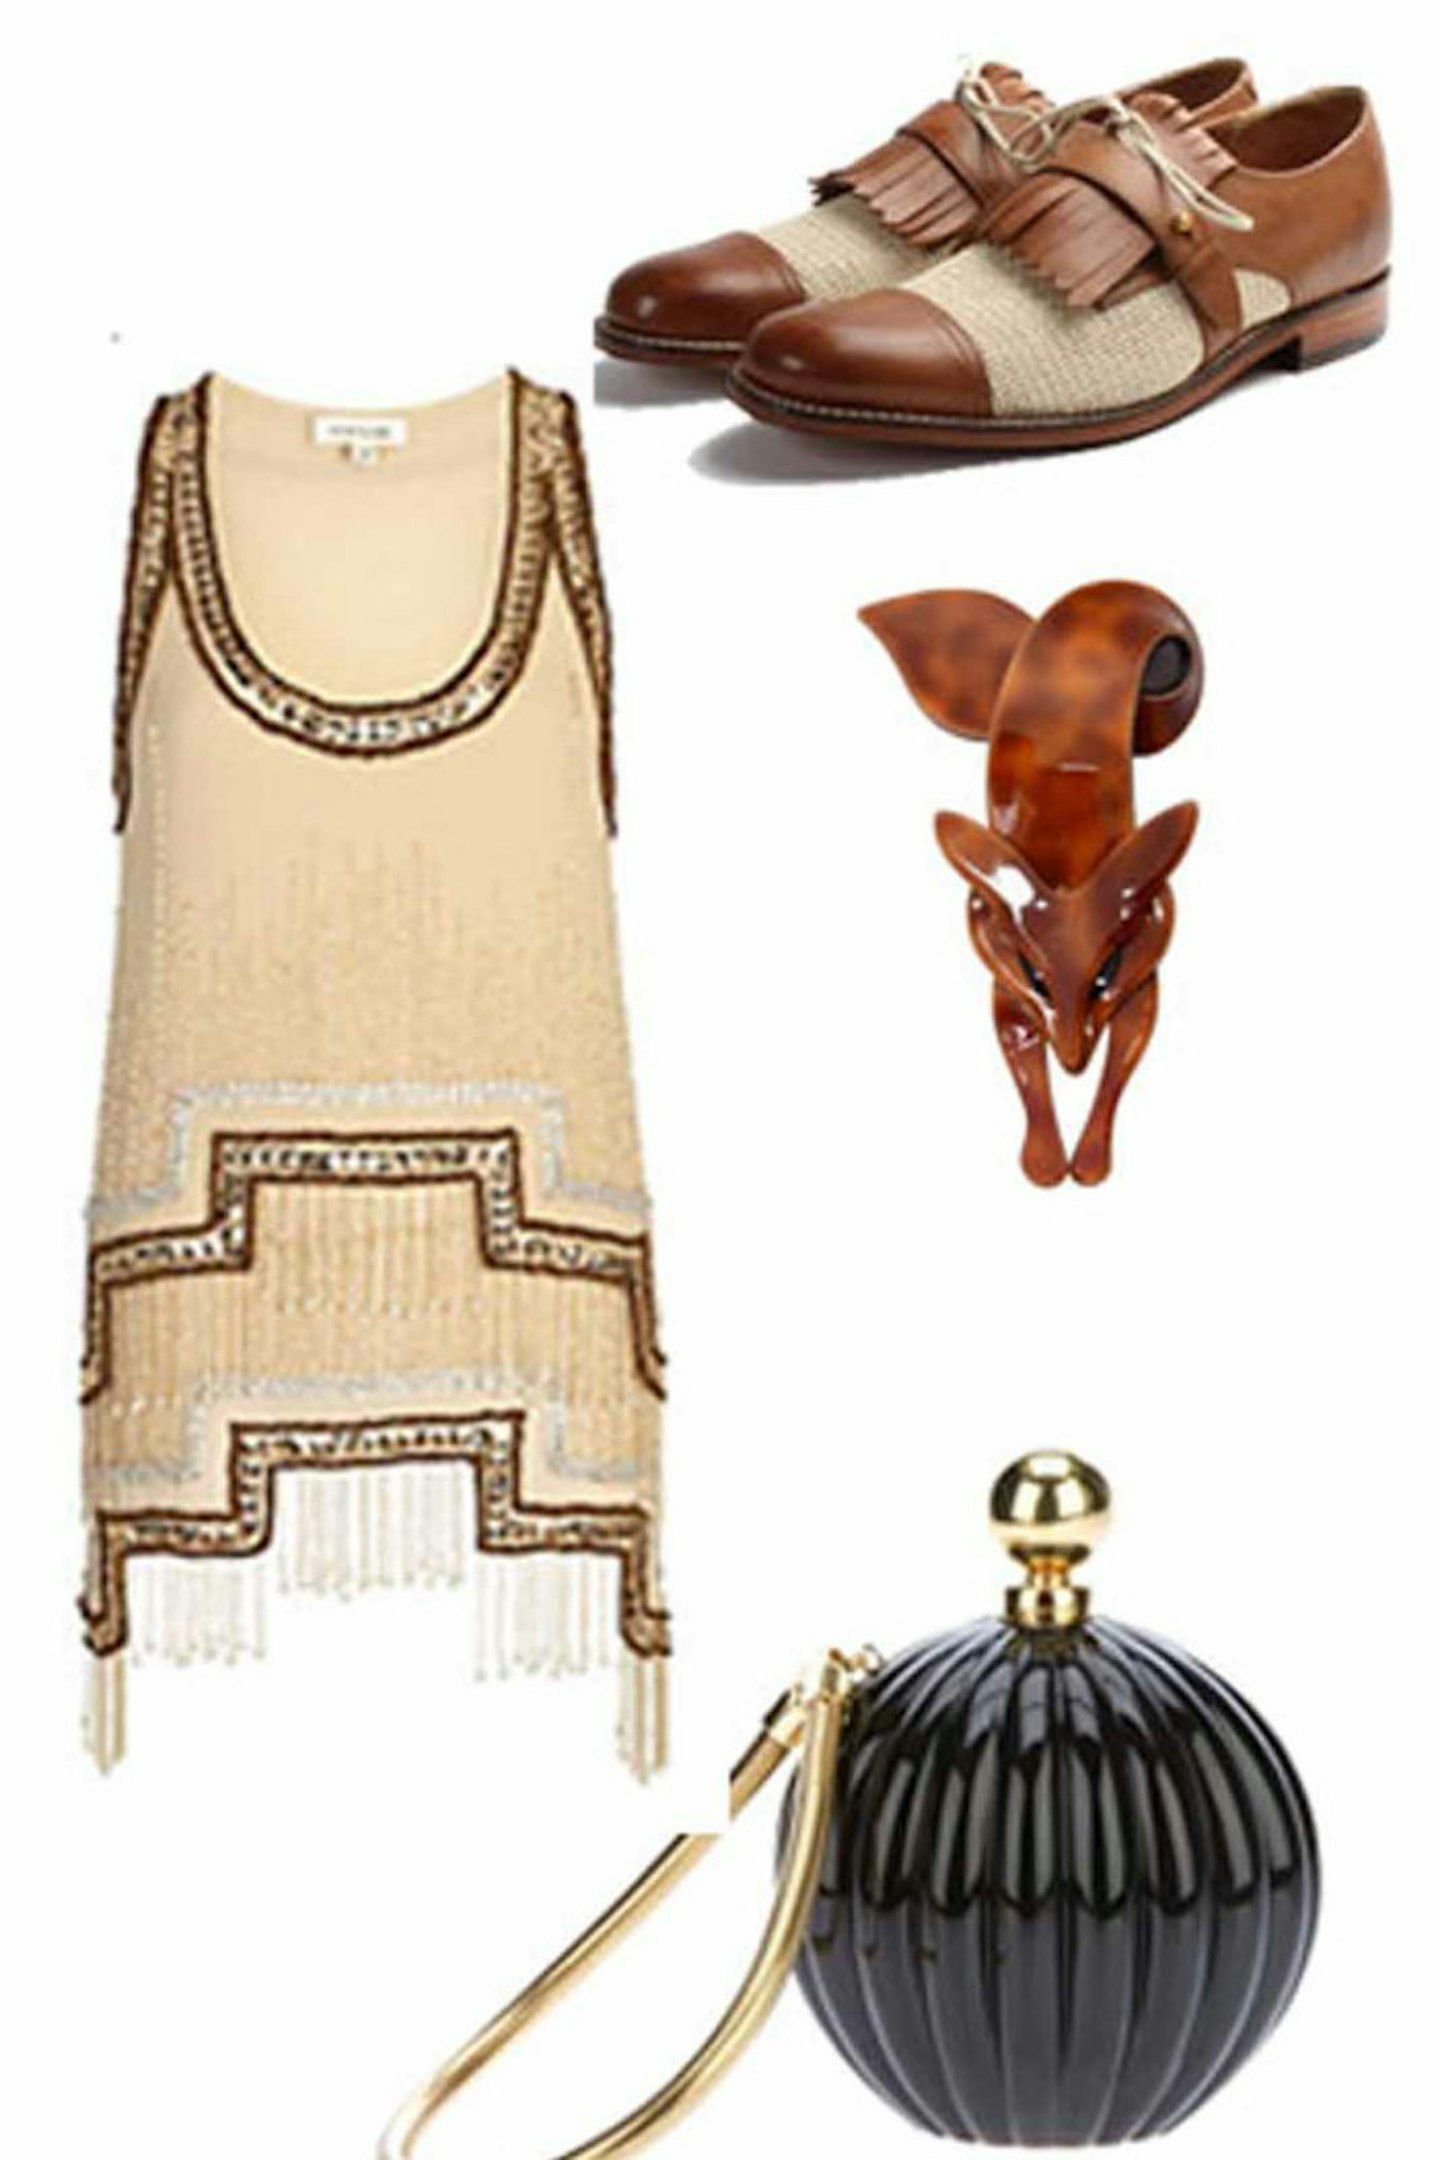 GALLERY >> Click through to view our top 50 Great Gatsby inspired buys...